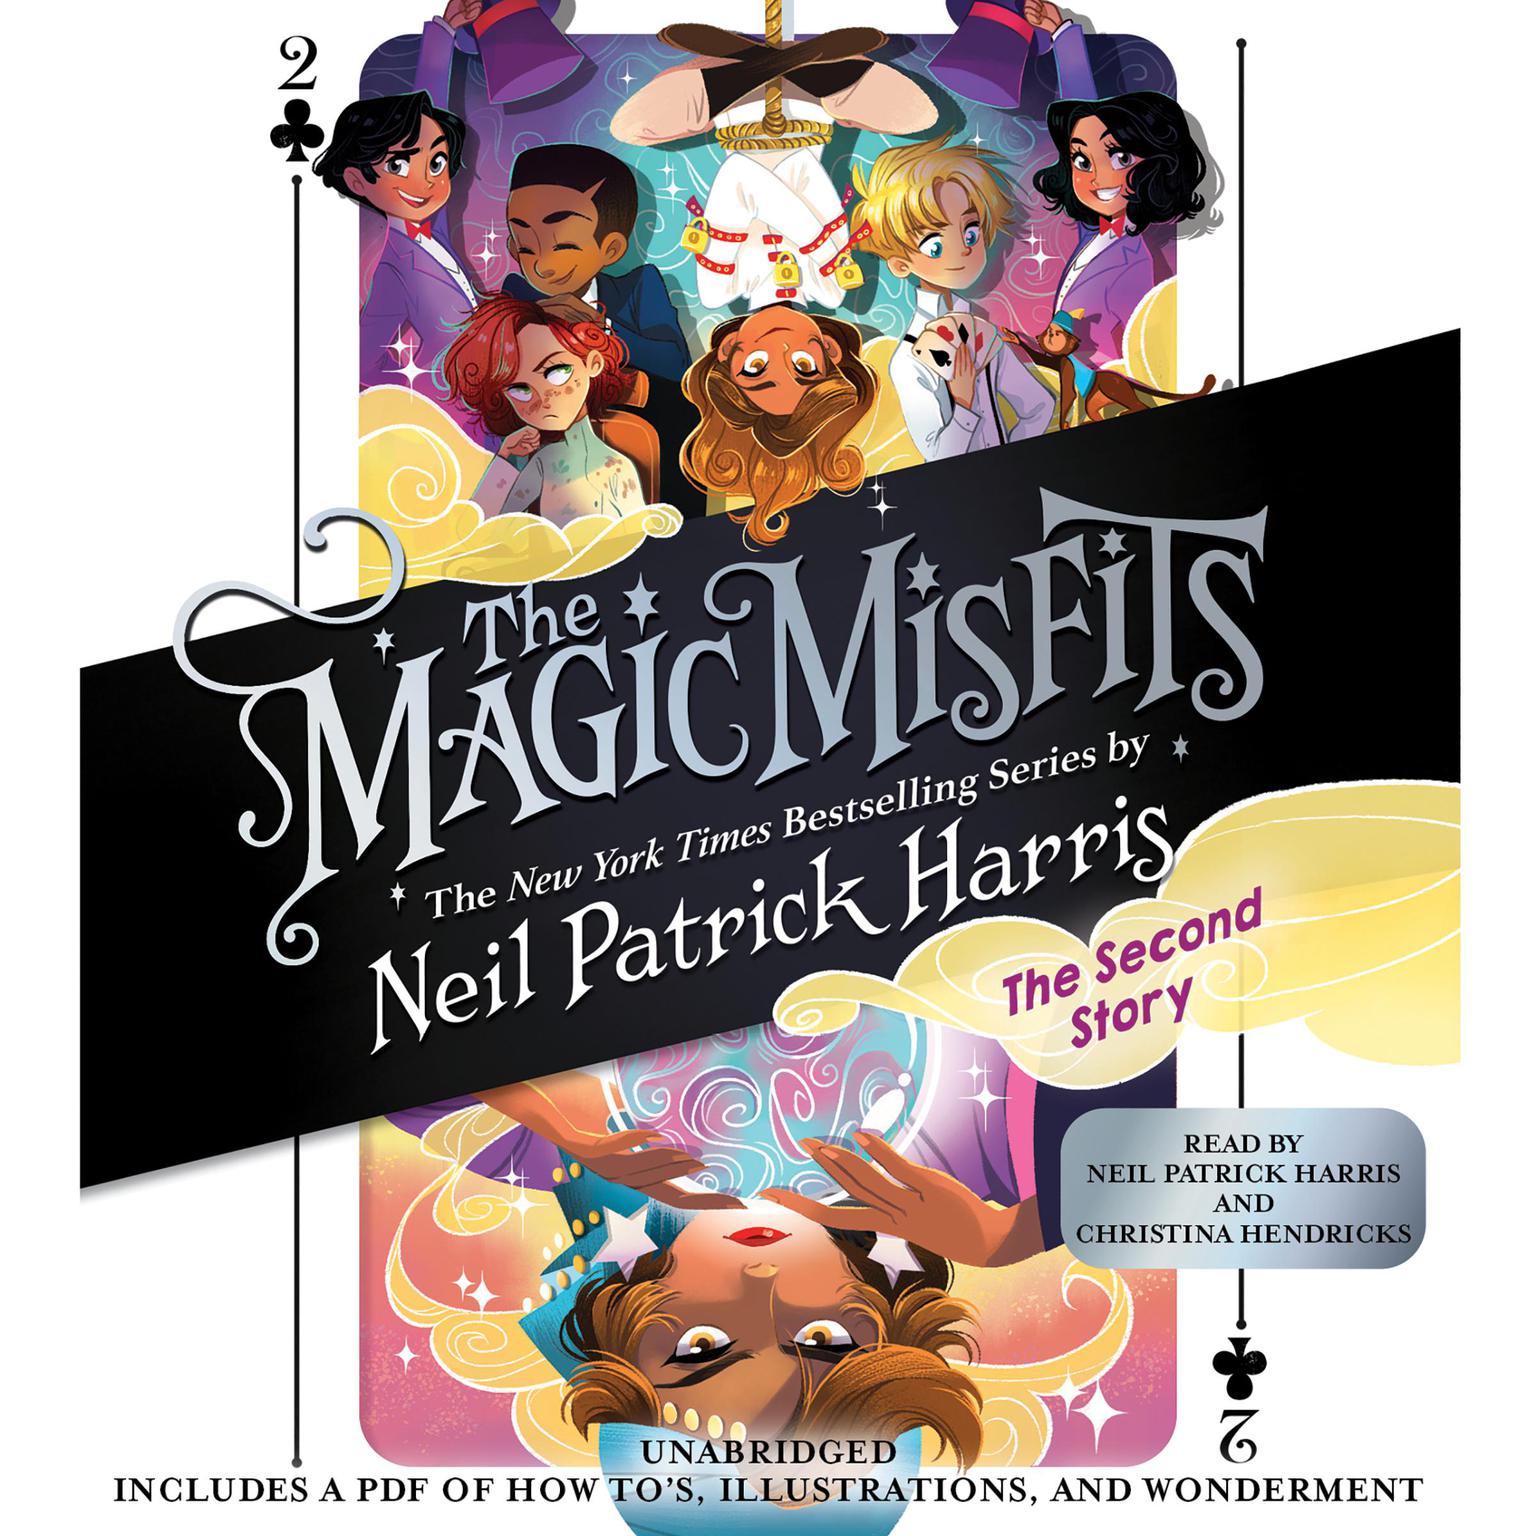 The Magic Misfits: The Second Story Audiobook, by Neil Patrick Harris